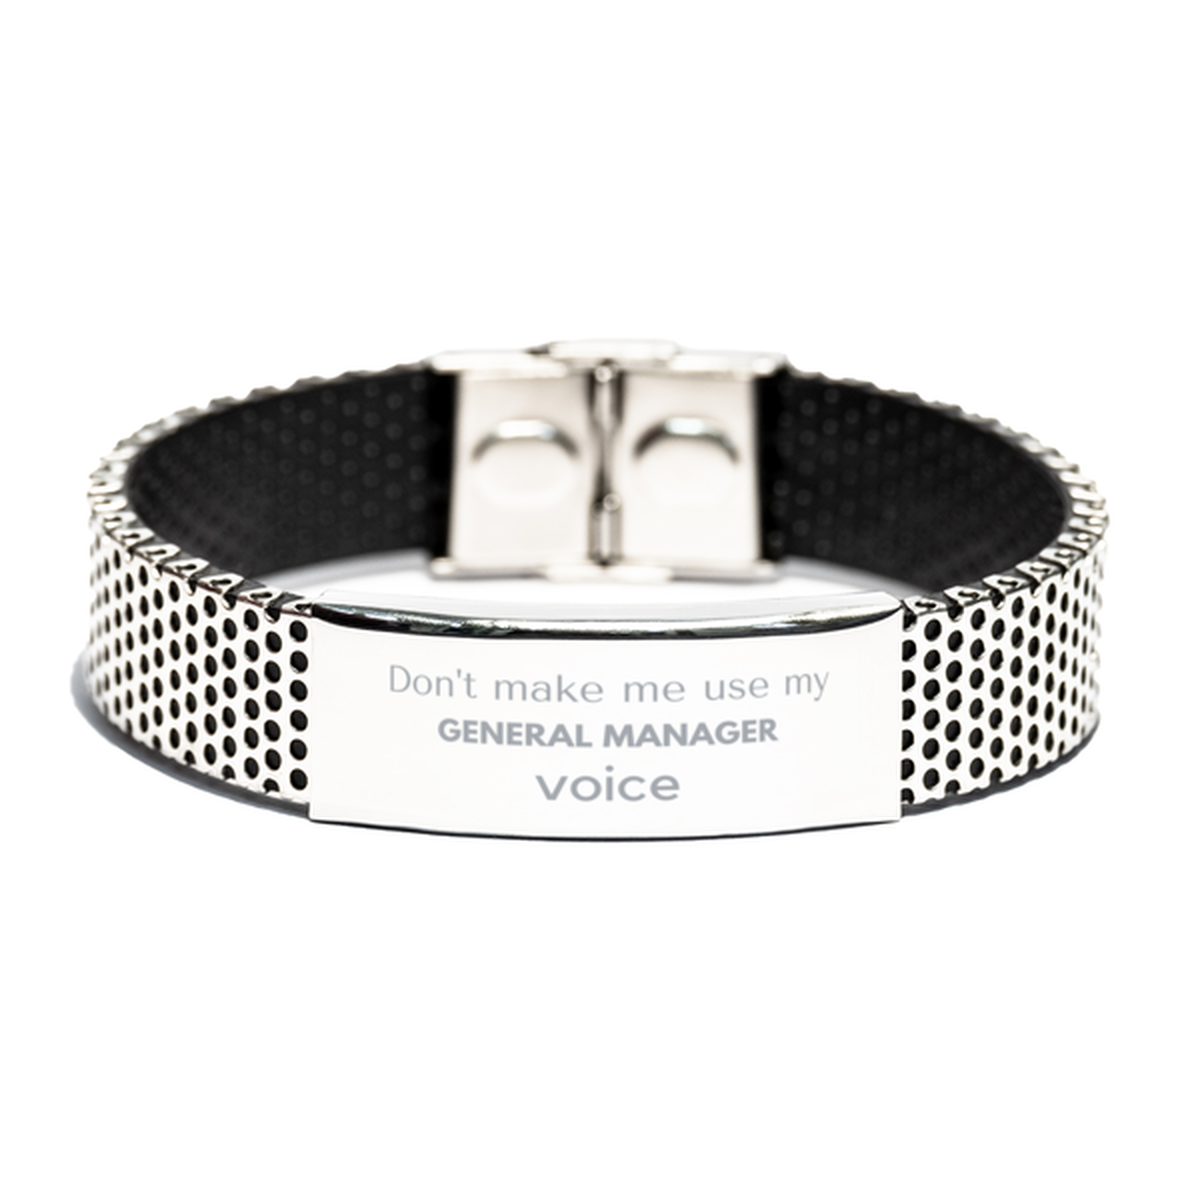 Don't make me use my General Manager voice, Sarcasm General Manager Gifts, Christmas General Manager Stainless Steel Bracelet Birthday Unique Gifts For General Manager Coworkers, Men, Women, Colleague, Friends